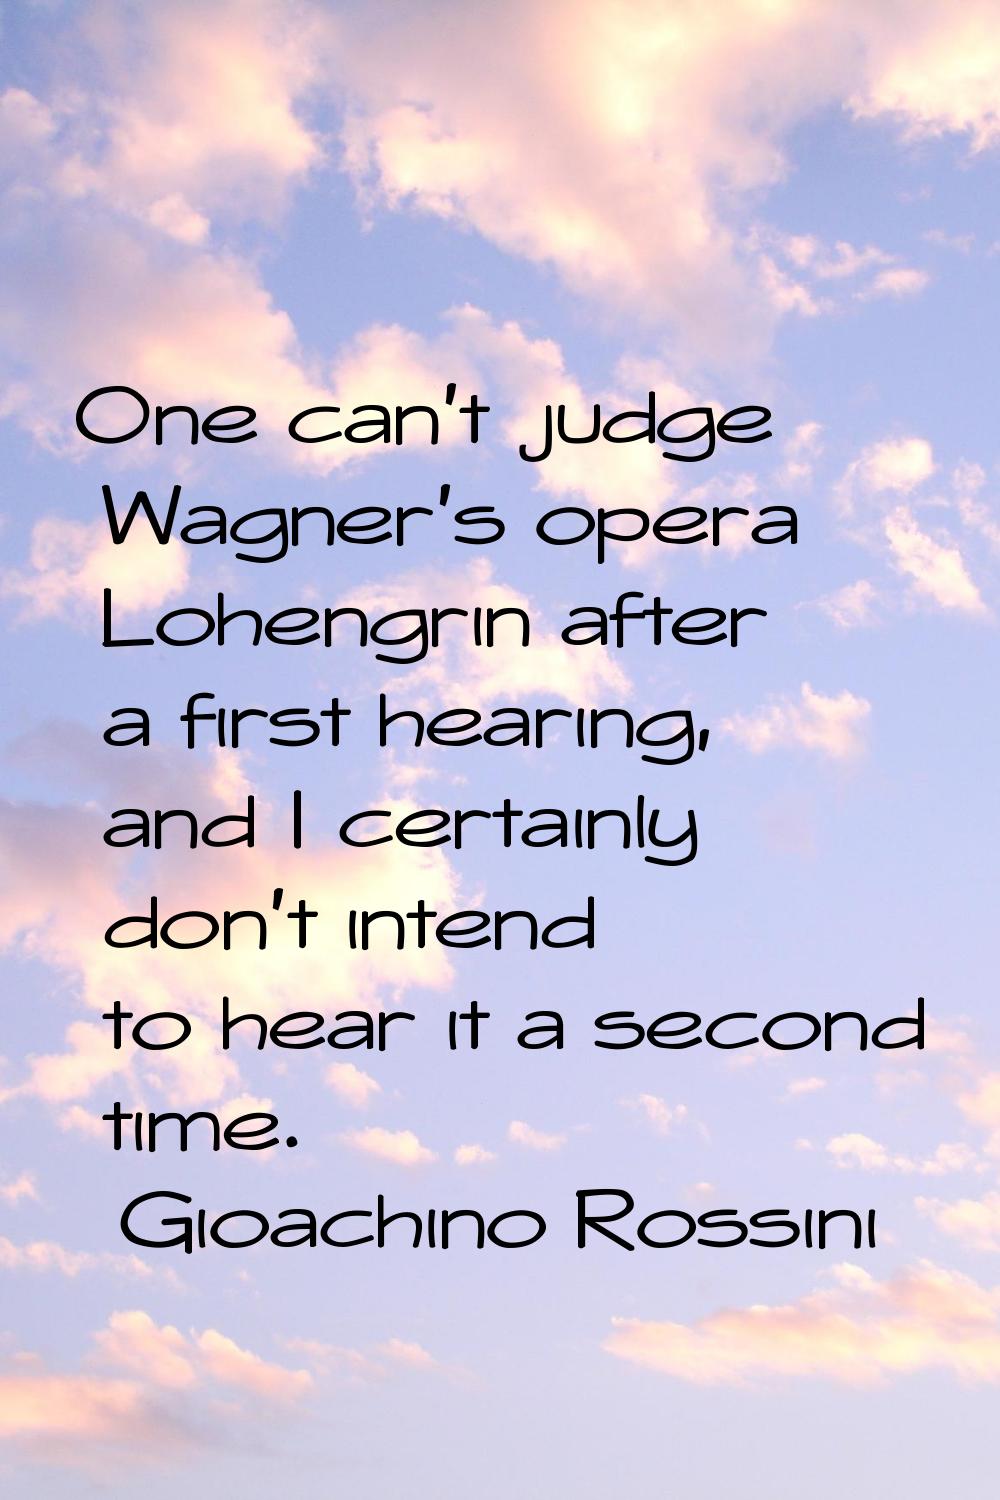 One can't judge Wagner's opera Lohengrin after a first hearing, and I certainly don't intend to hea